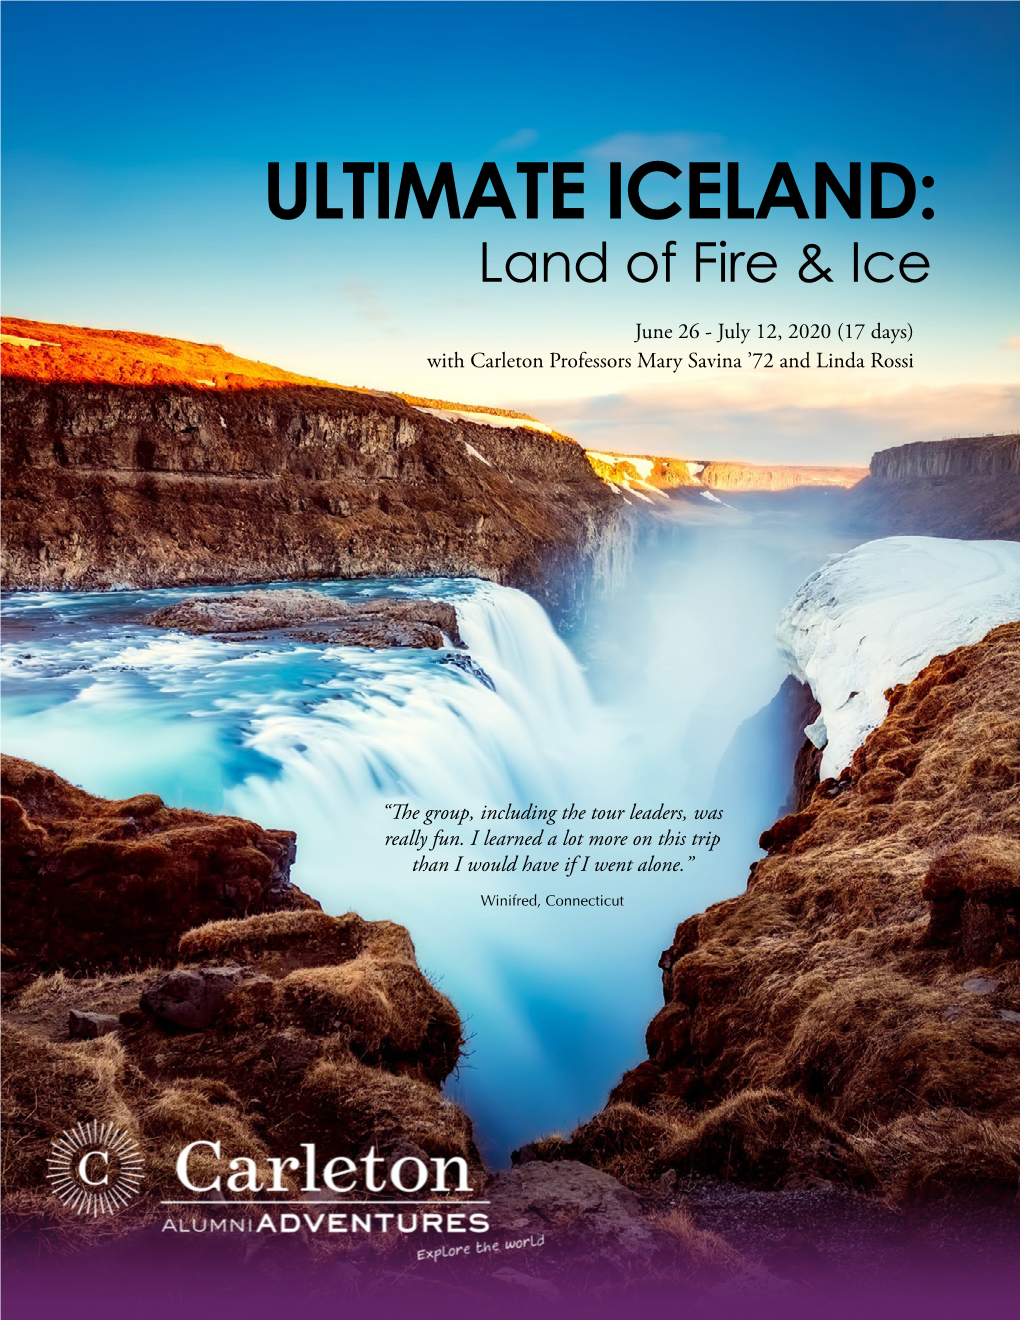 ULTIMATE ICELAND: Land of Fire & Ice